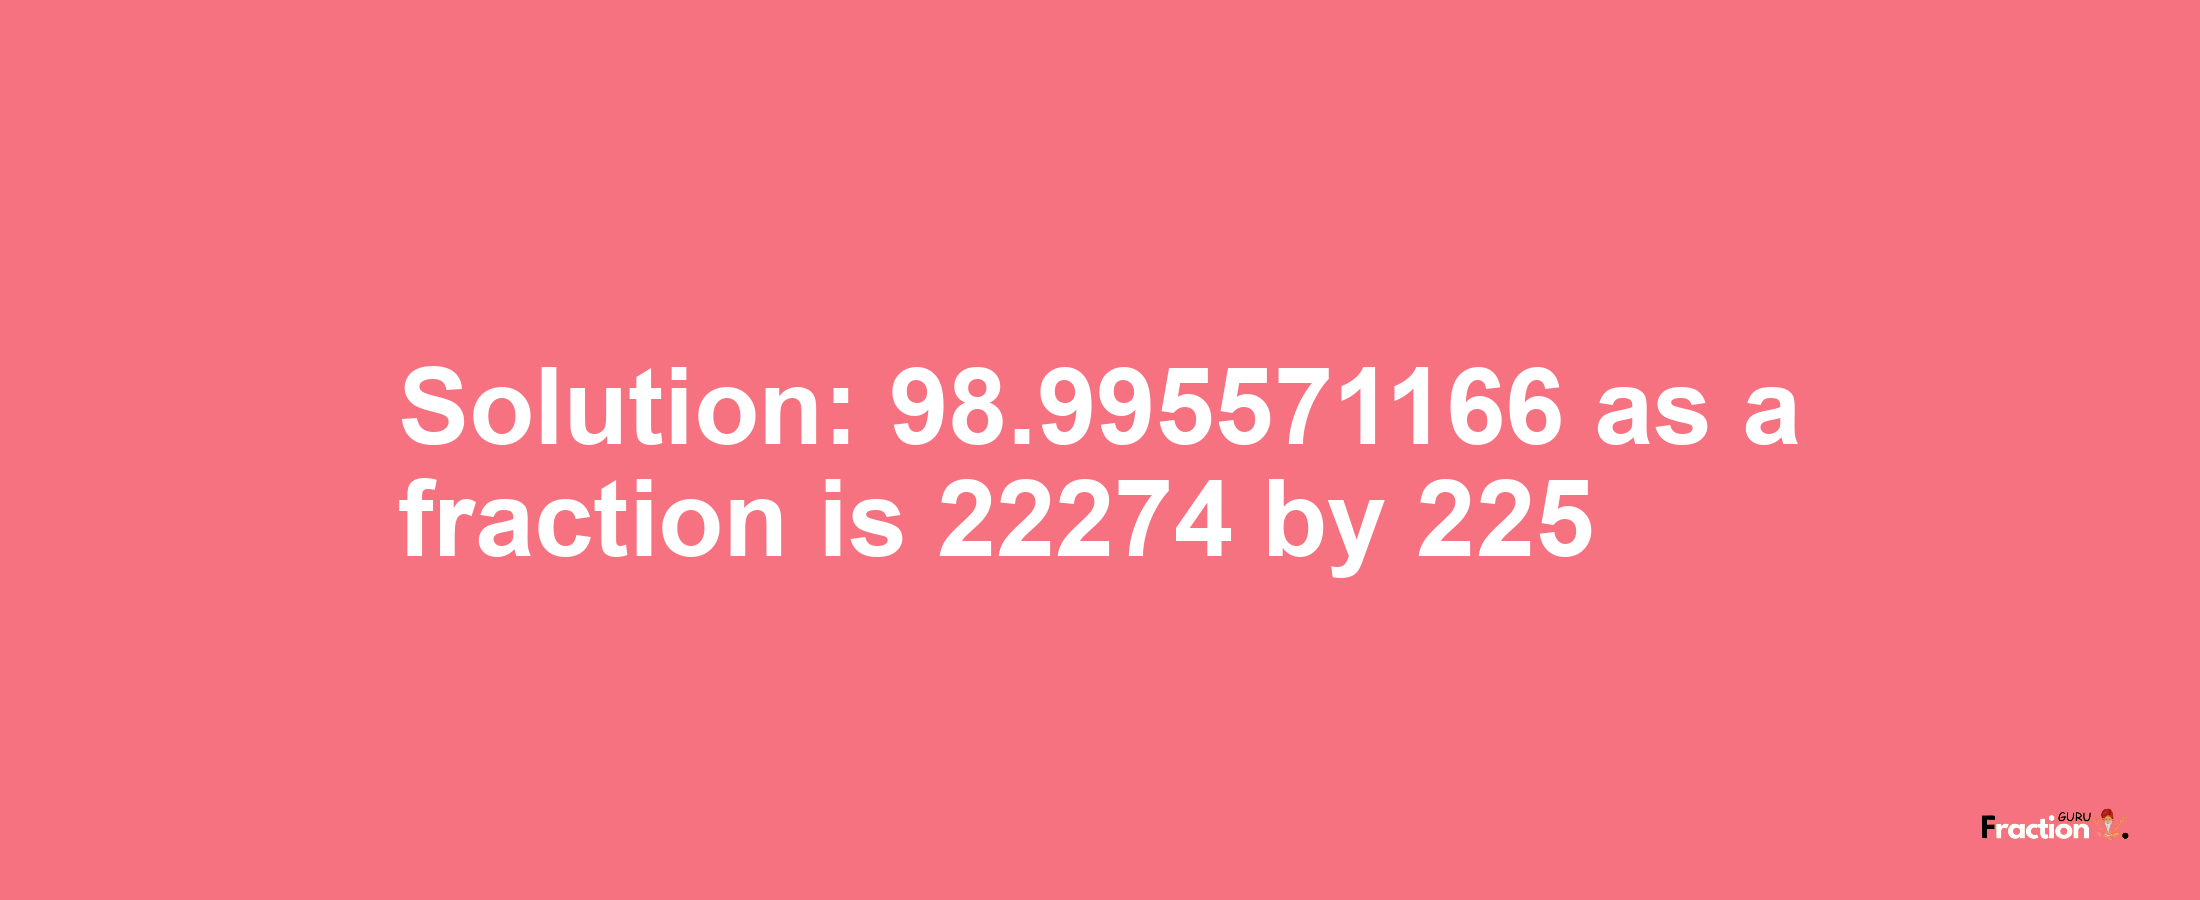 Solution:98.995571166 as a fraction is 22274/225